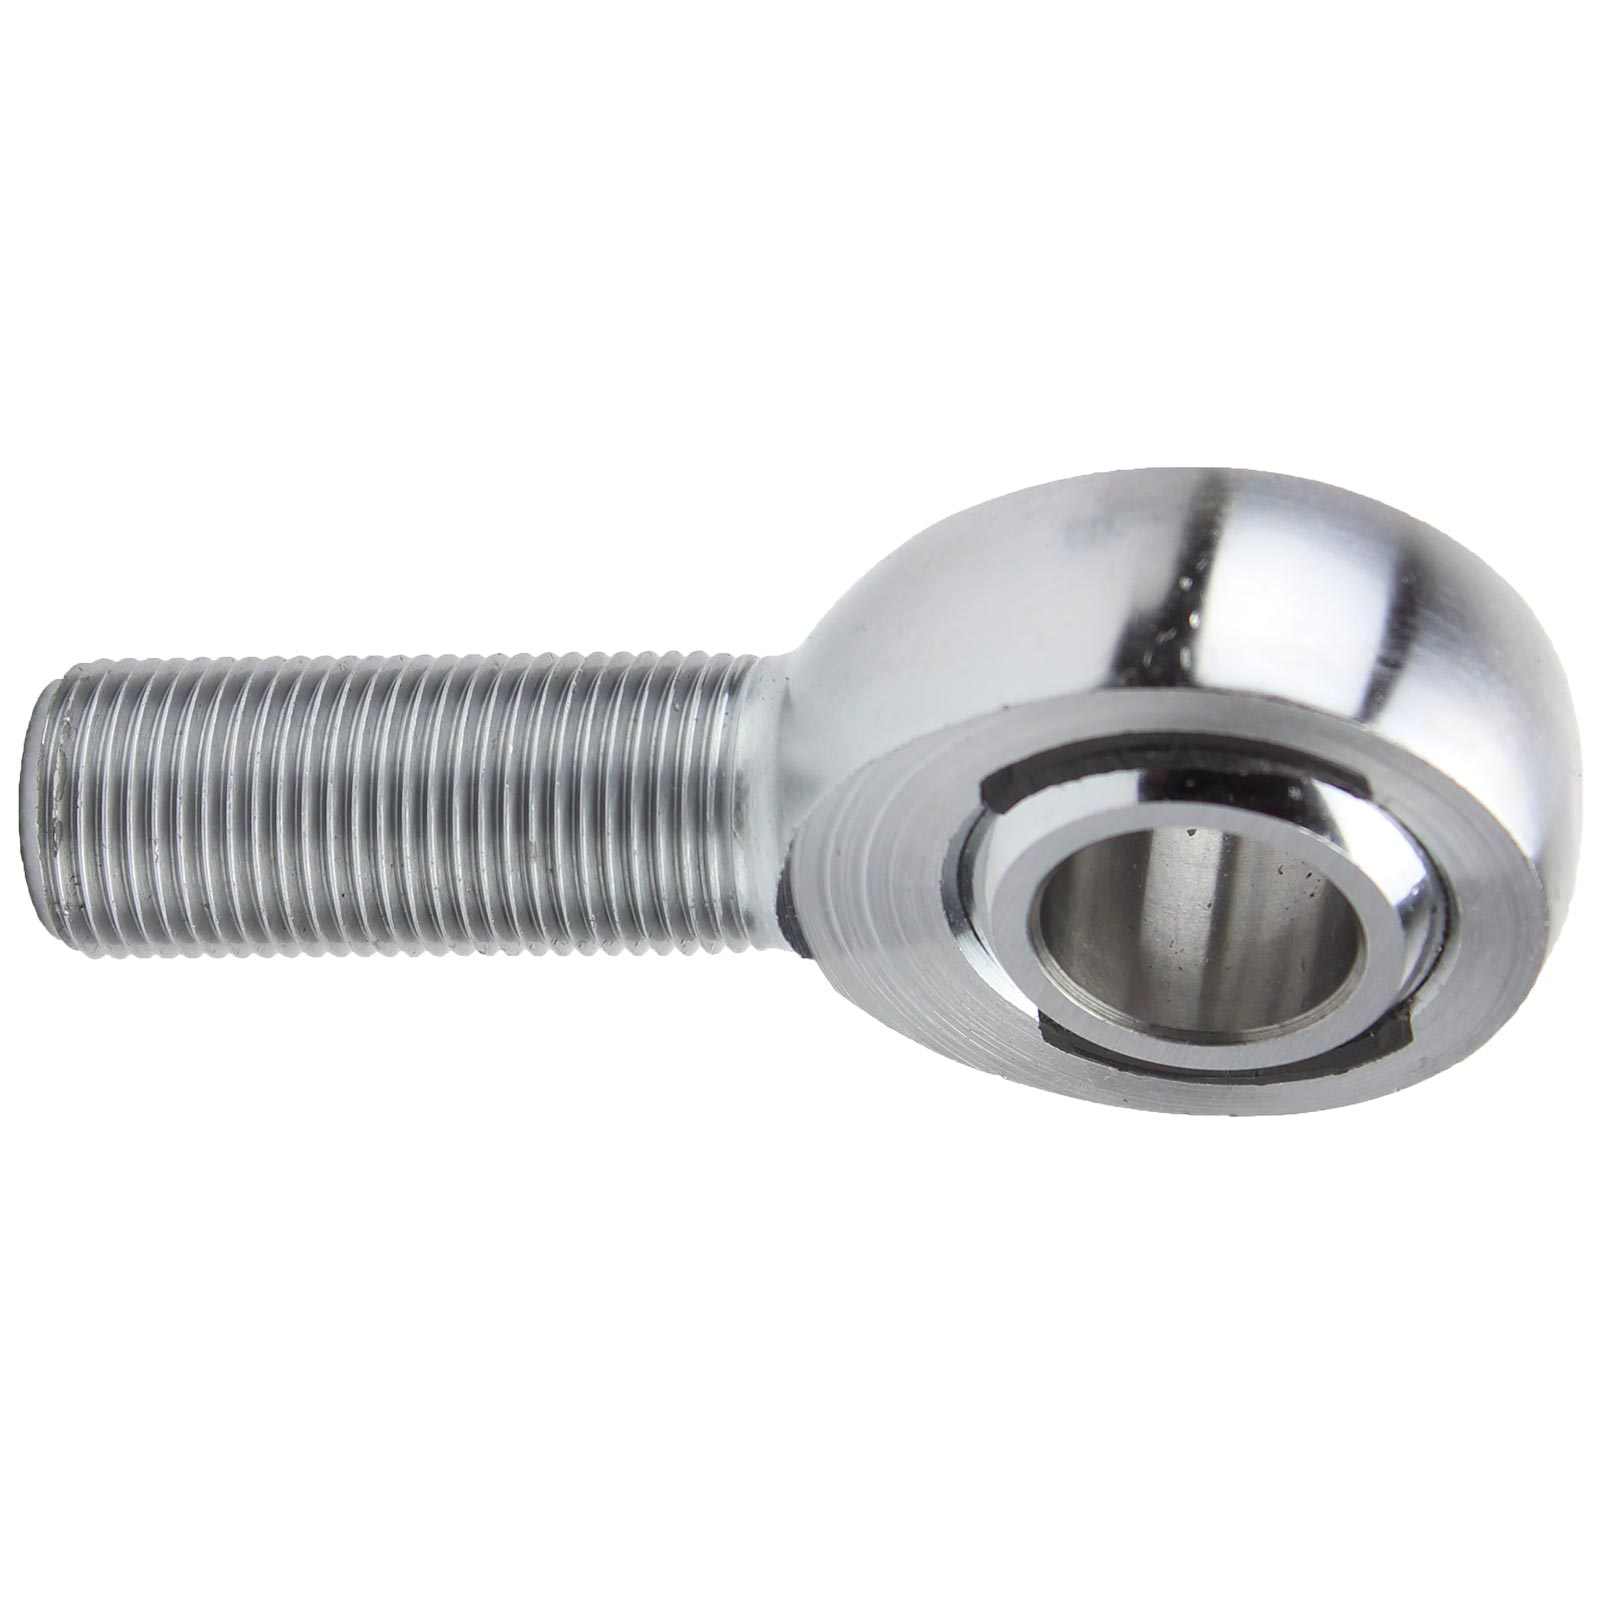 RuffStuff Specialties R1405 3/4 Inch x 5/8 Inch Bore Chromoly Left Hand Threaded Spherical Rod Heim Joint 